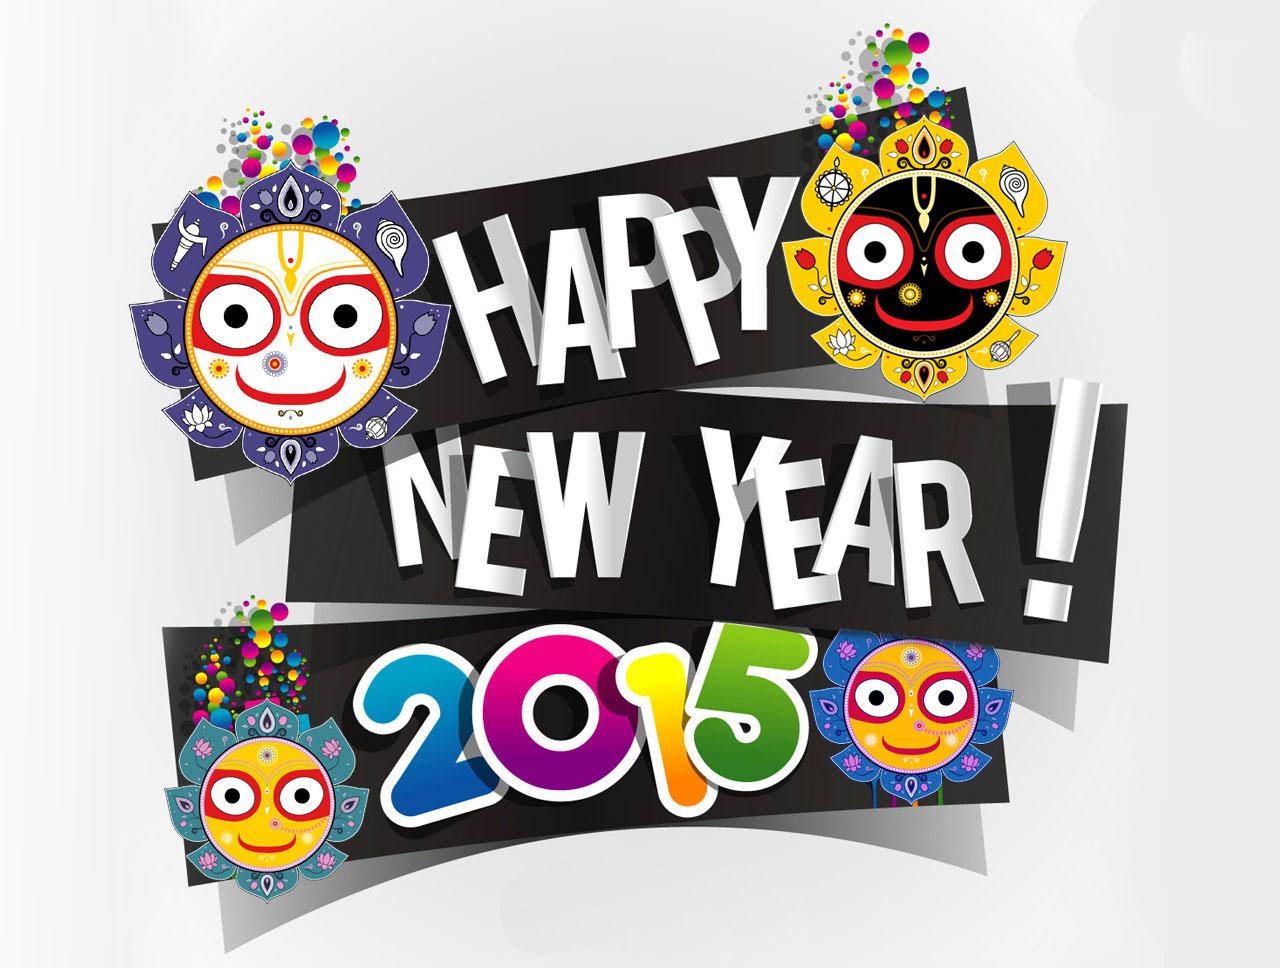 Free new year clipart download - ClipartFox